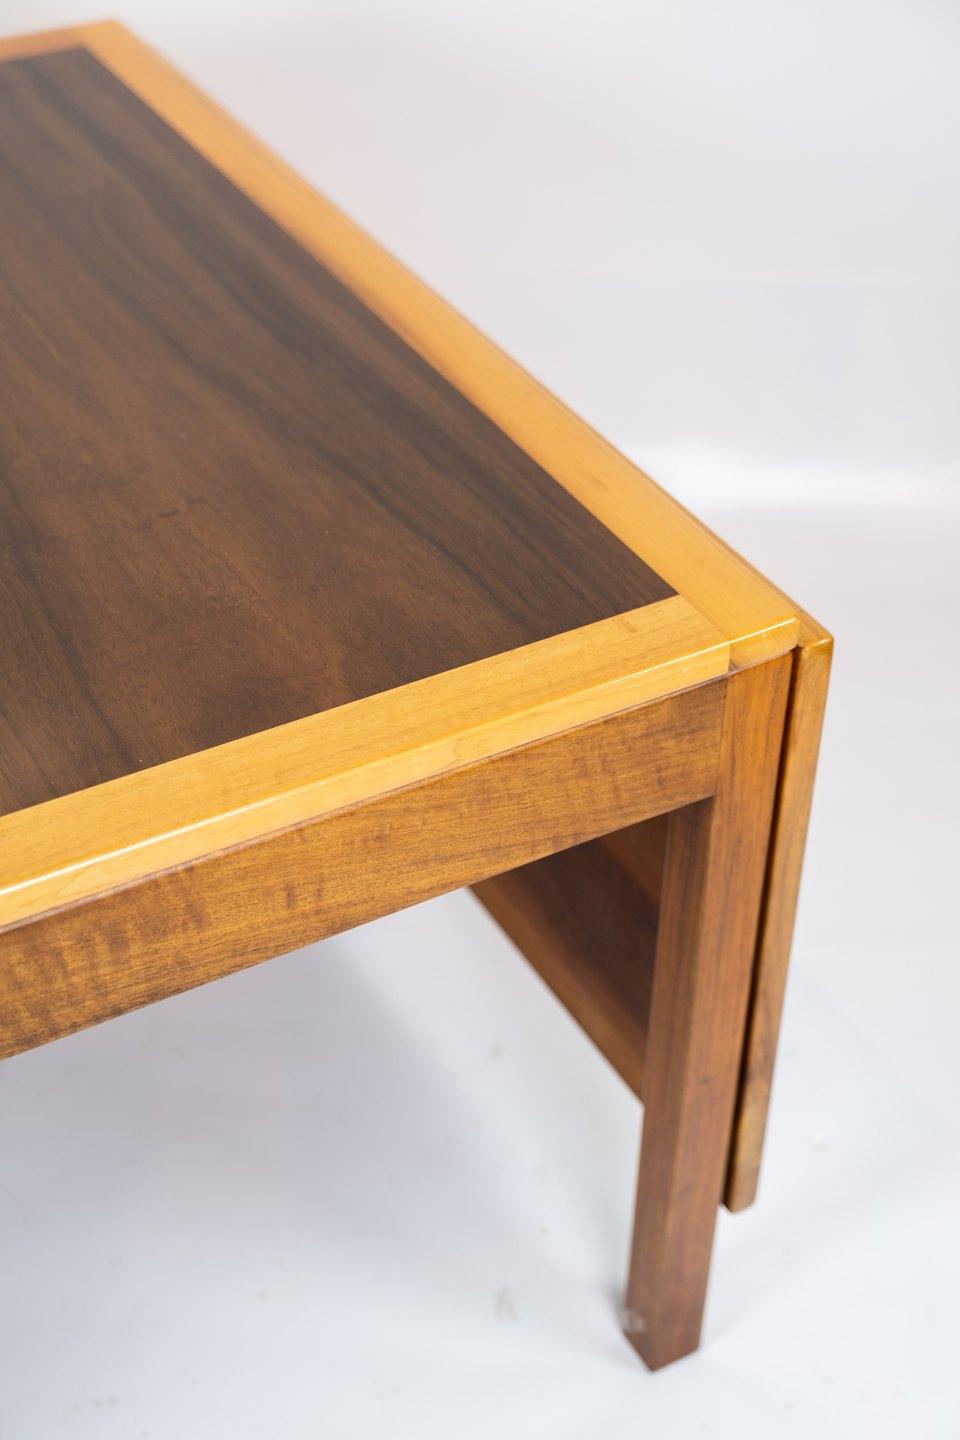 Scandinavian Modern Coffee Table of Rosewood with Extensions, Designed by Børge Mogensen